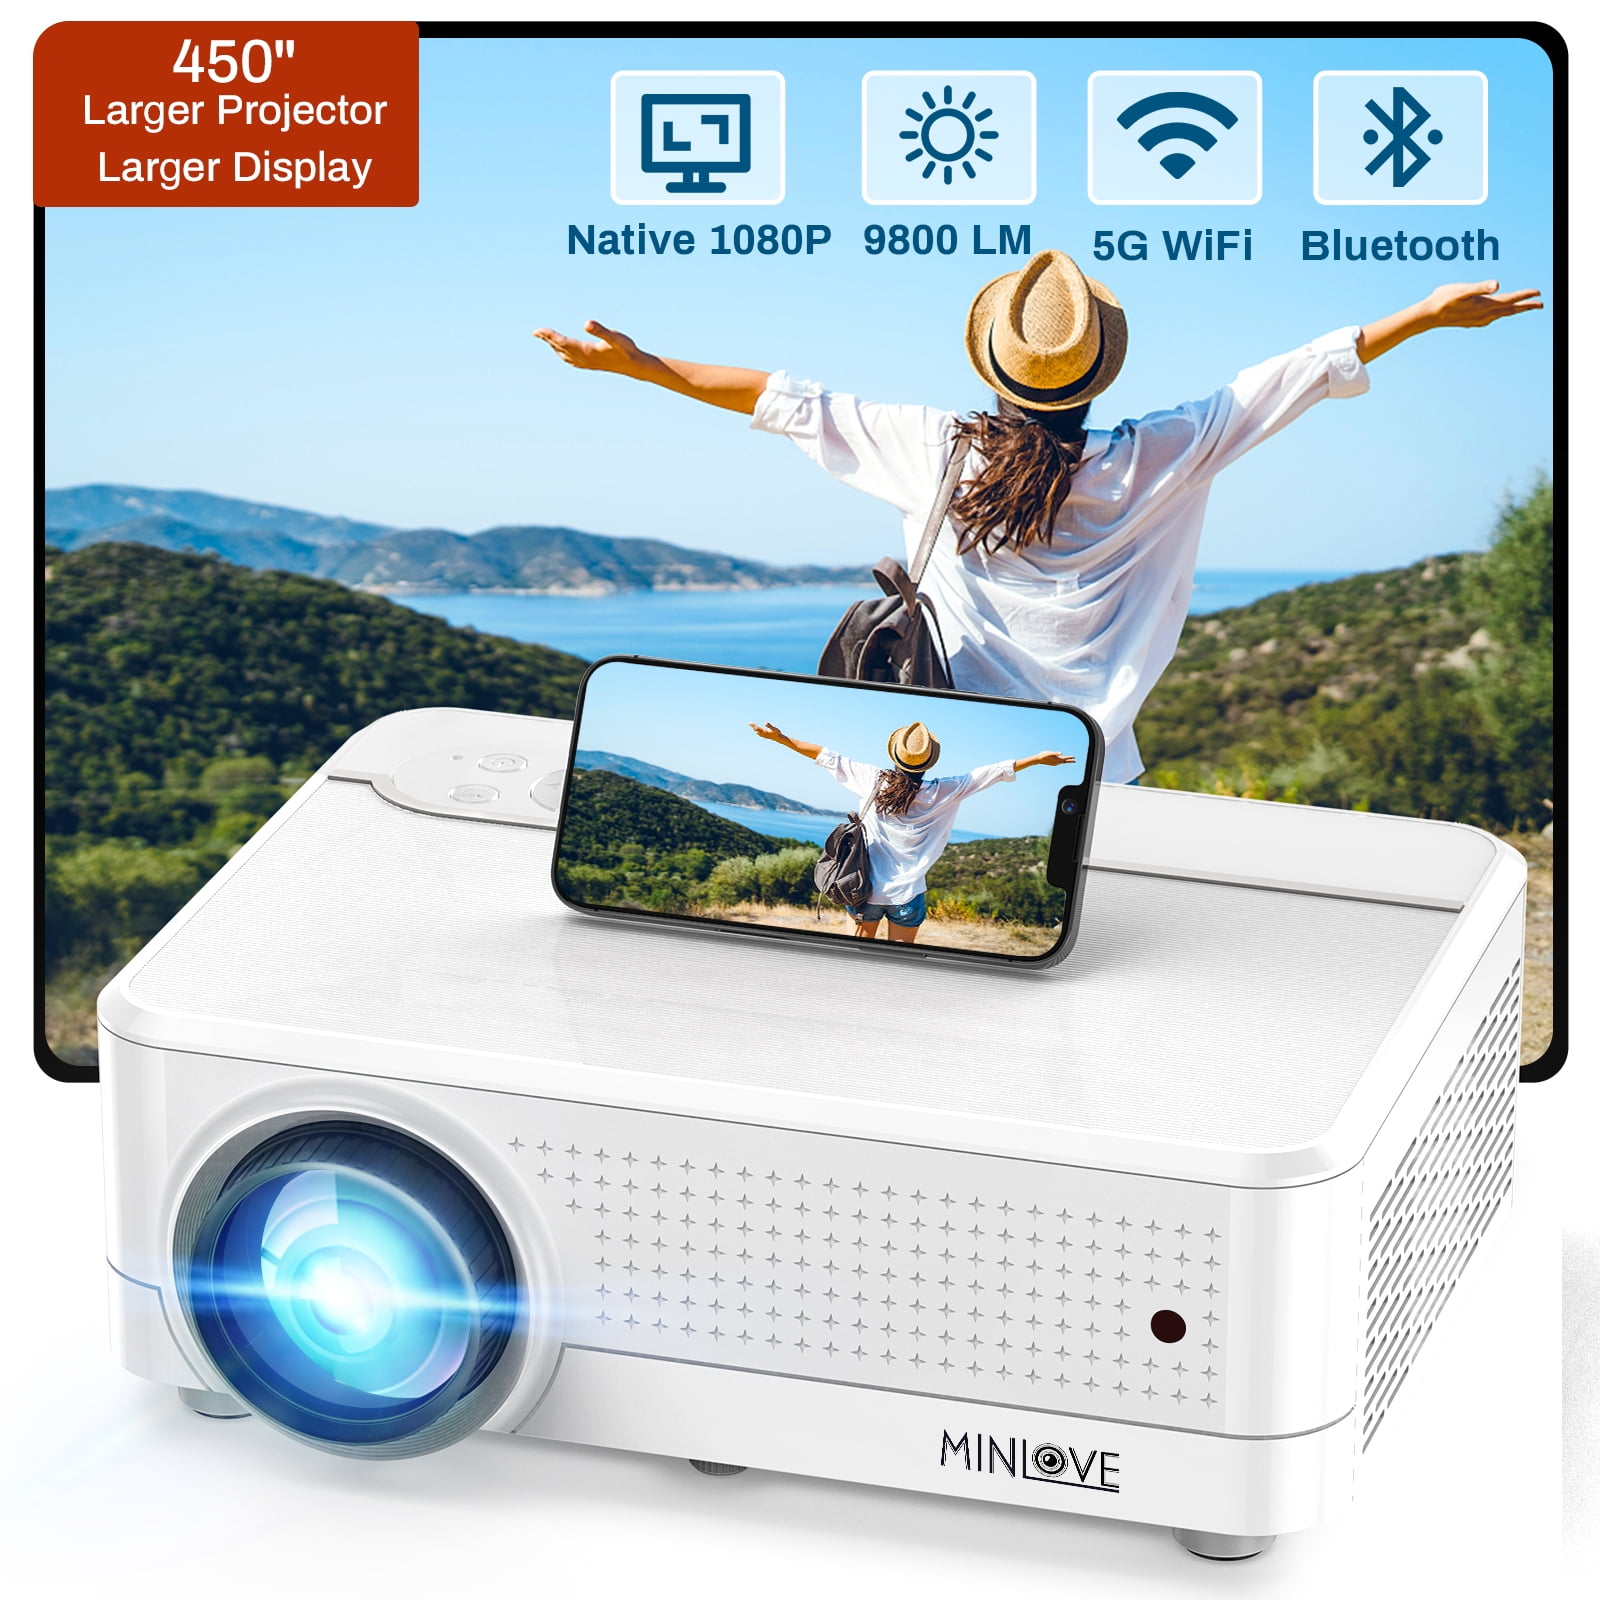 Mini 5G WiFi Projector, 4K Supported, MINLOVE Native 1080p 9800 LM FHD  Portable Movie Projector for Bedroom Ceiling Home Theater Outdoor,  Compatible with TV/HDMI/VGA/AV/USB 